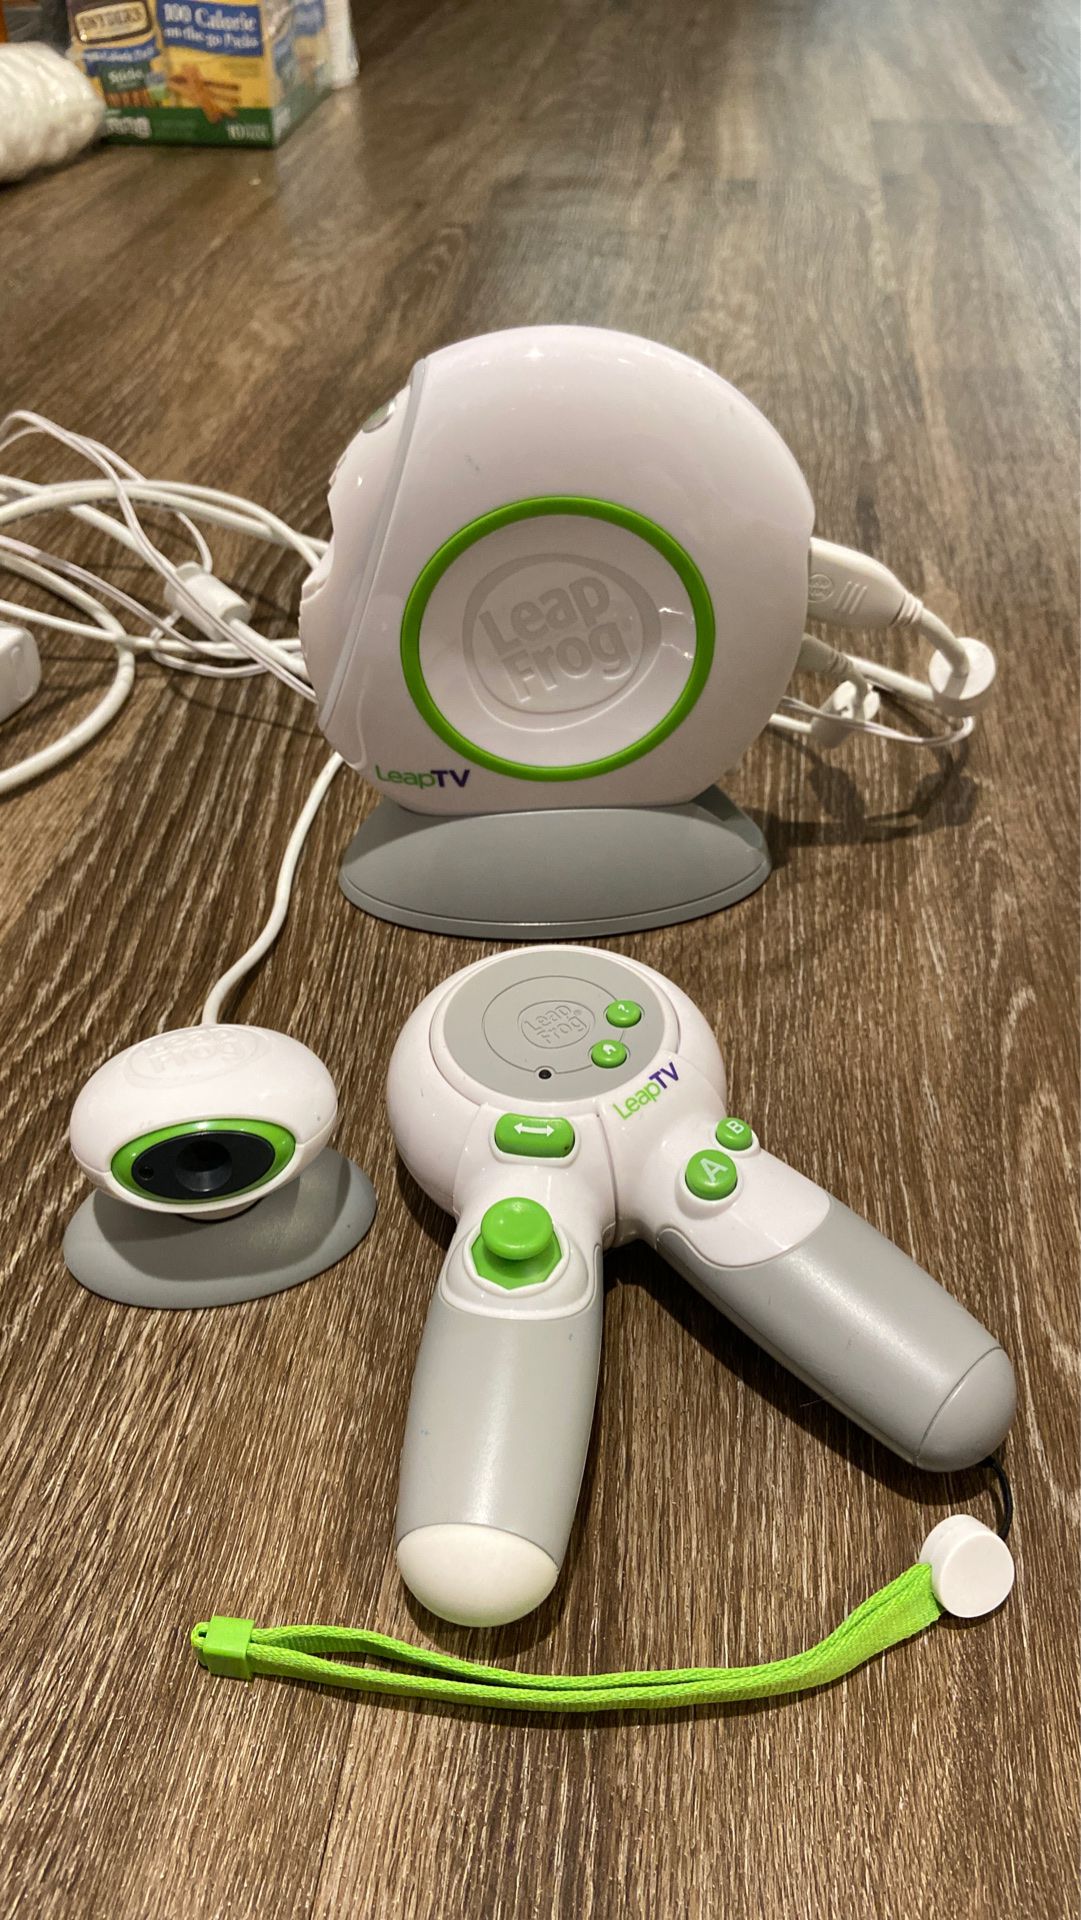 Leap frog gaming system